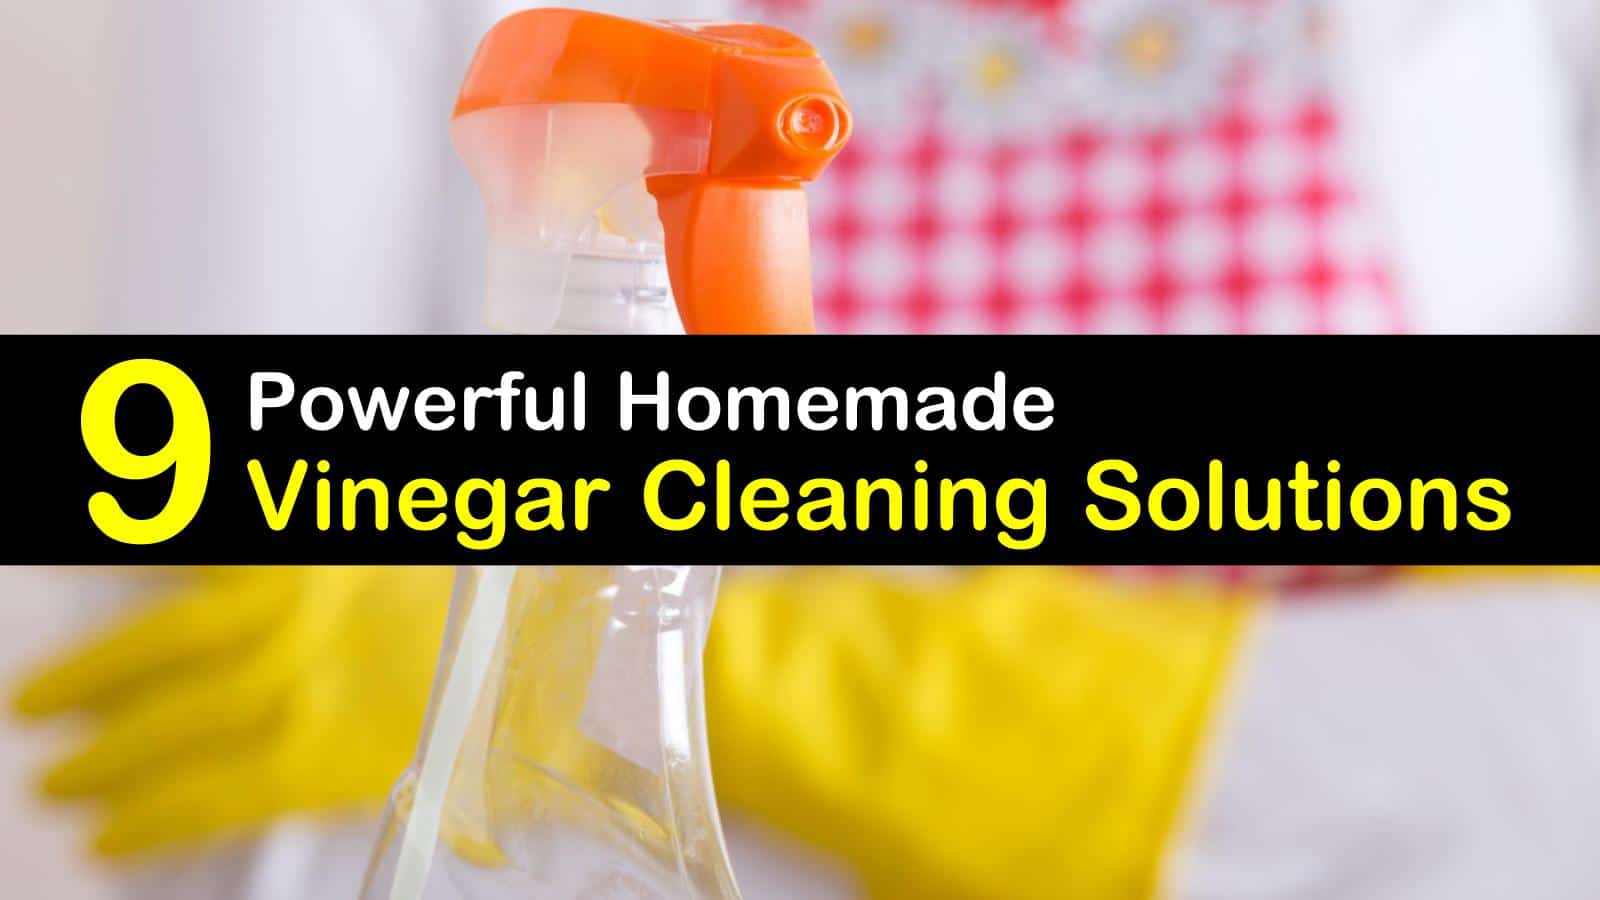 vinegar cleaning solutions titleimg1